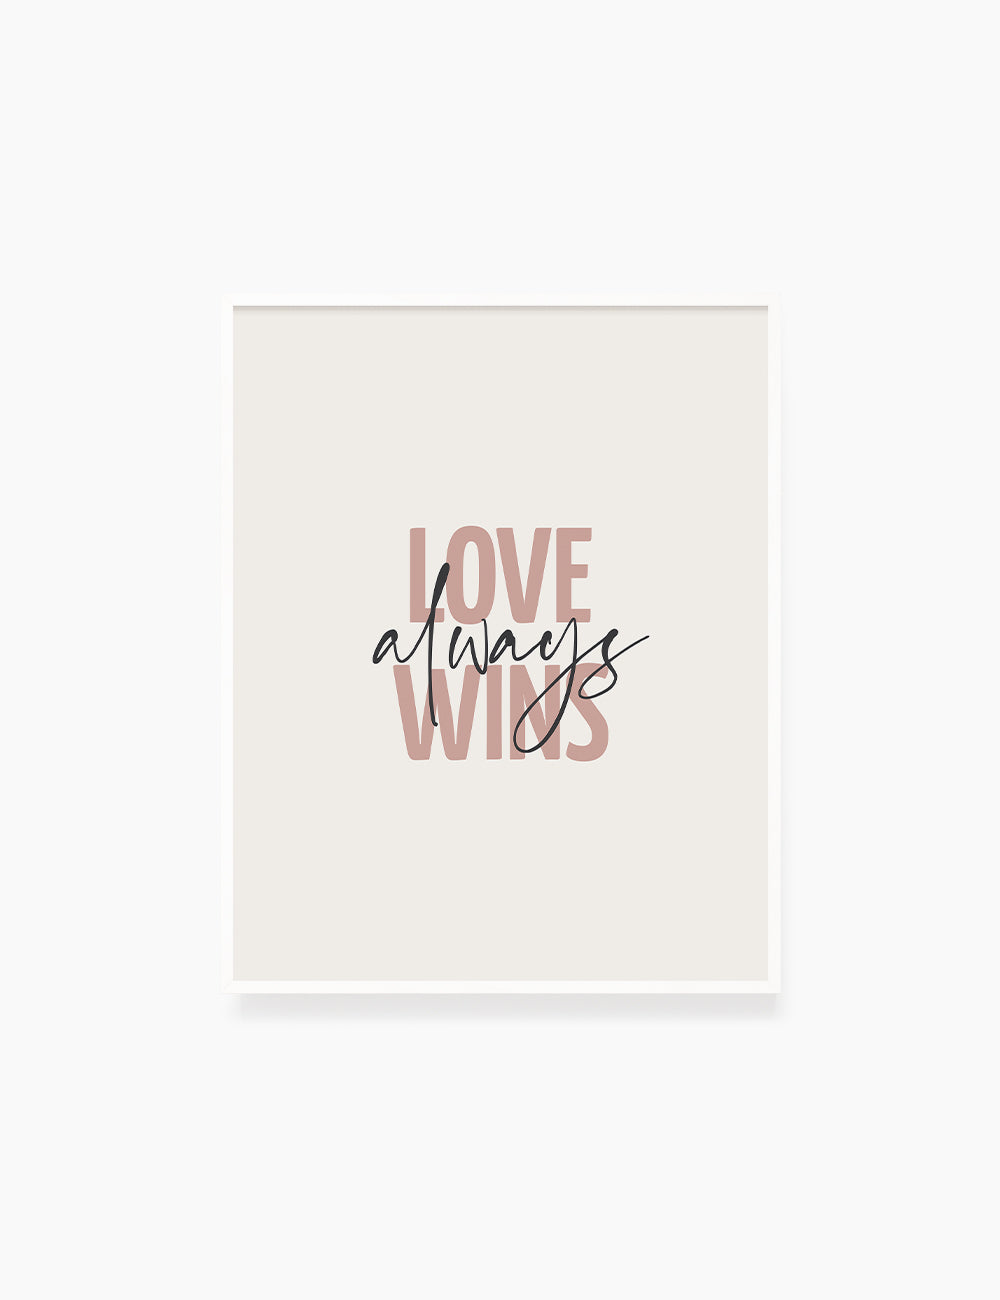 LOVE ALWAYS WINS. Blush. Rose. Pale Red. Love quote. Romantic words. Printable Wall Art Quote. - PAPER MOON Art & Design